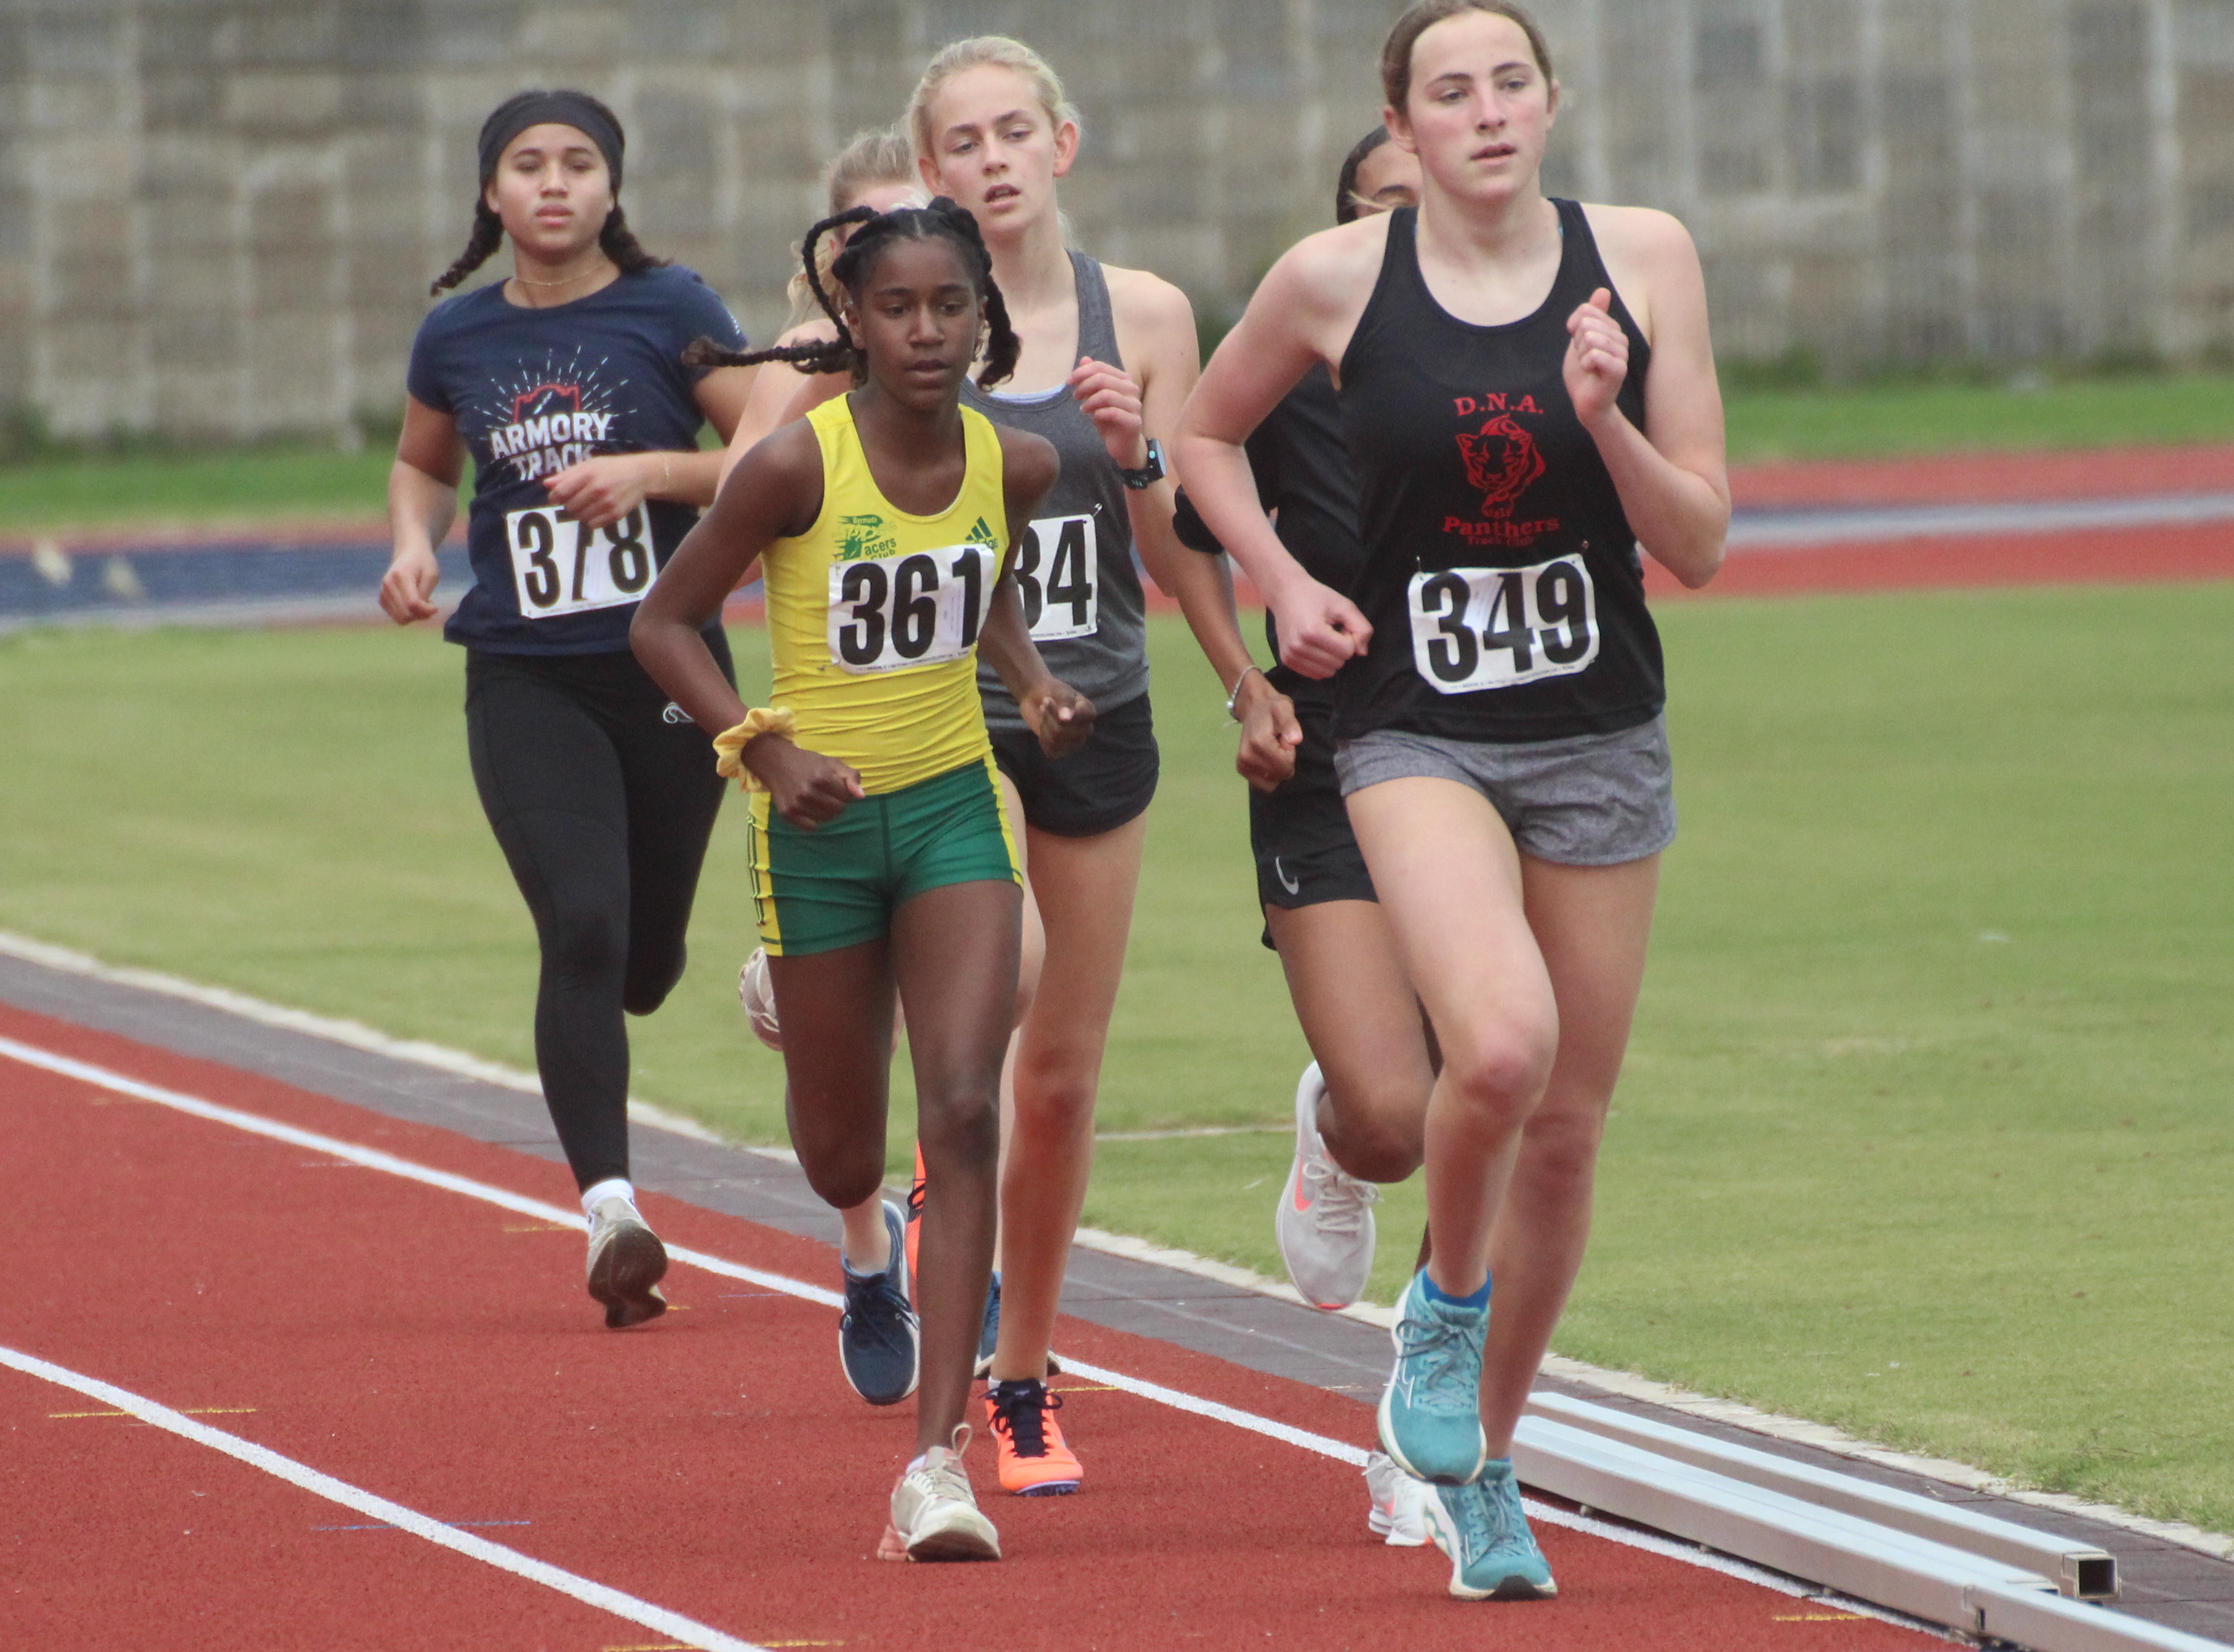 BNAA Hosted 3rd Carifta Games Trial Track Meet (Track and Field)